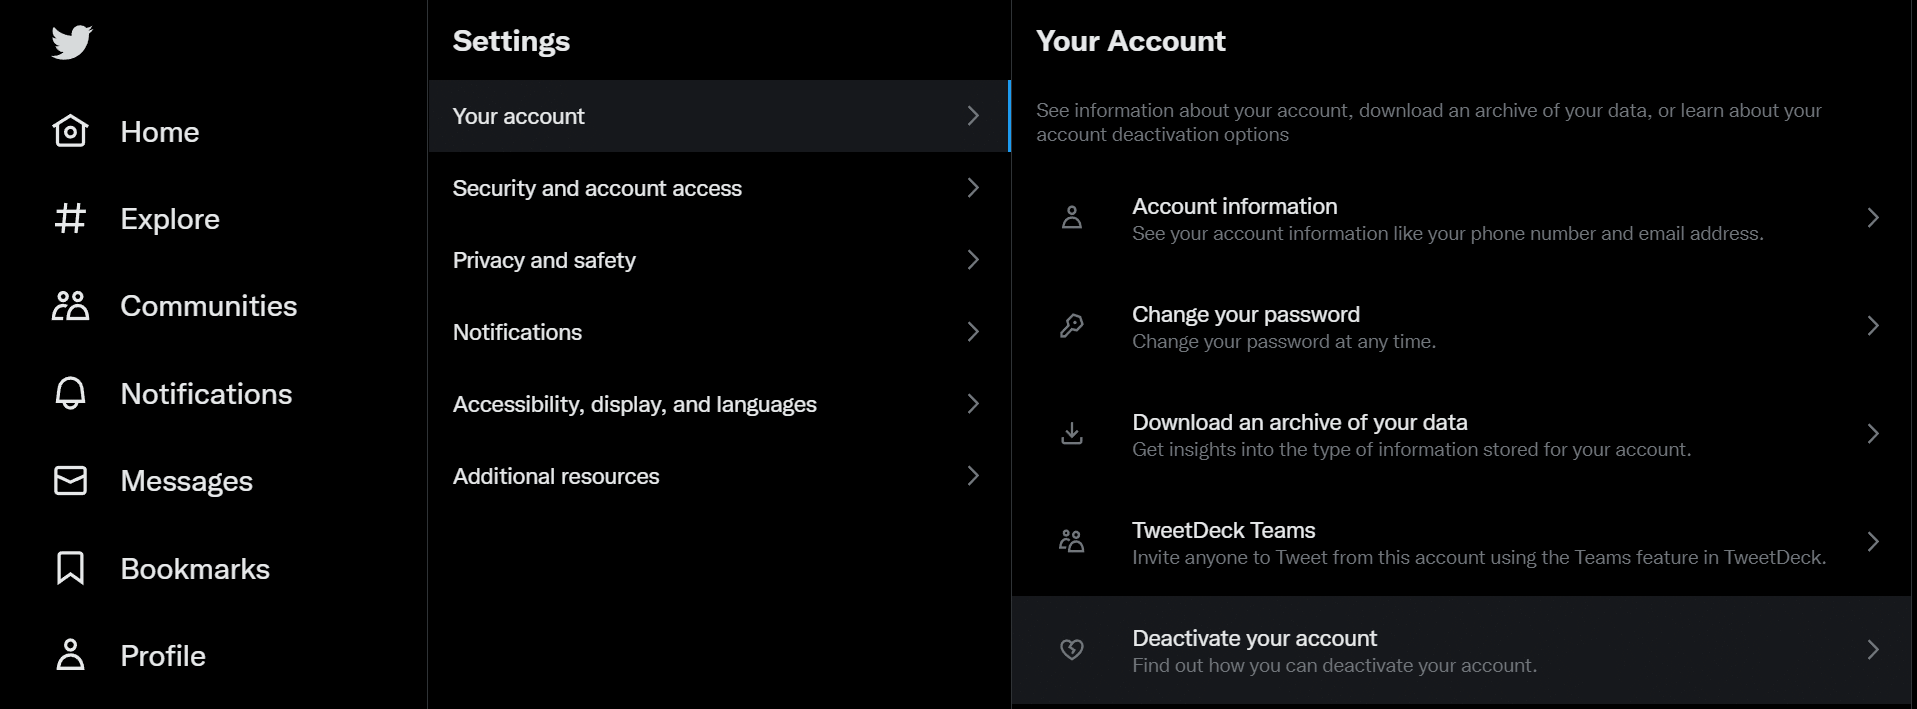 Your Account tab